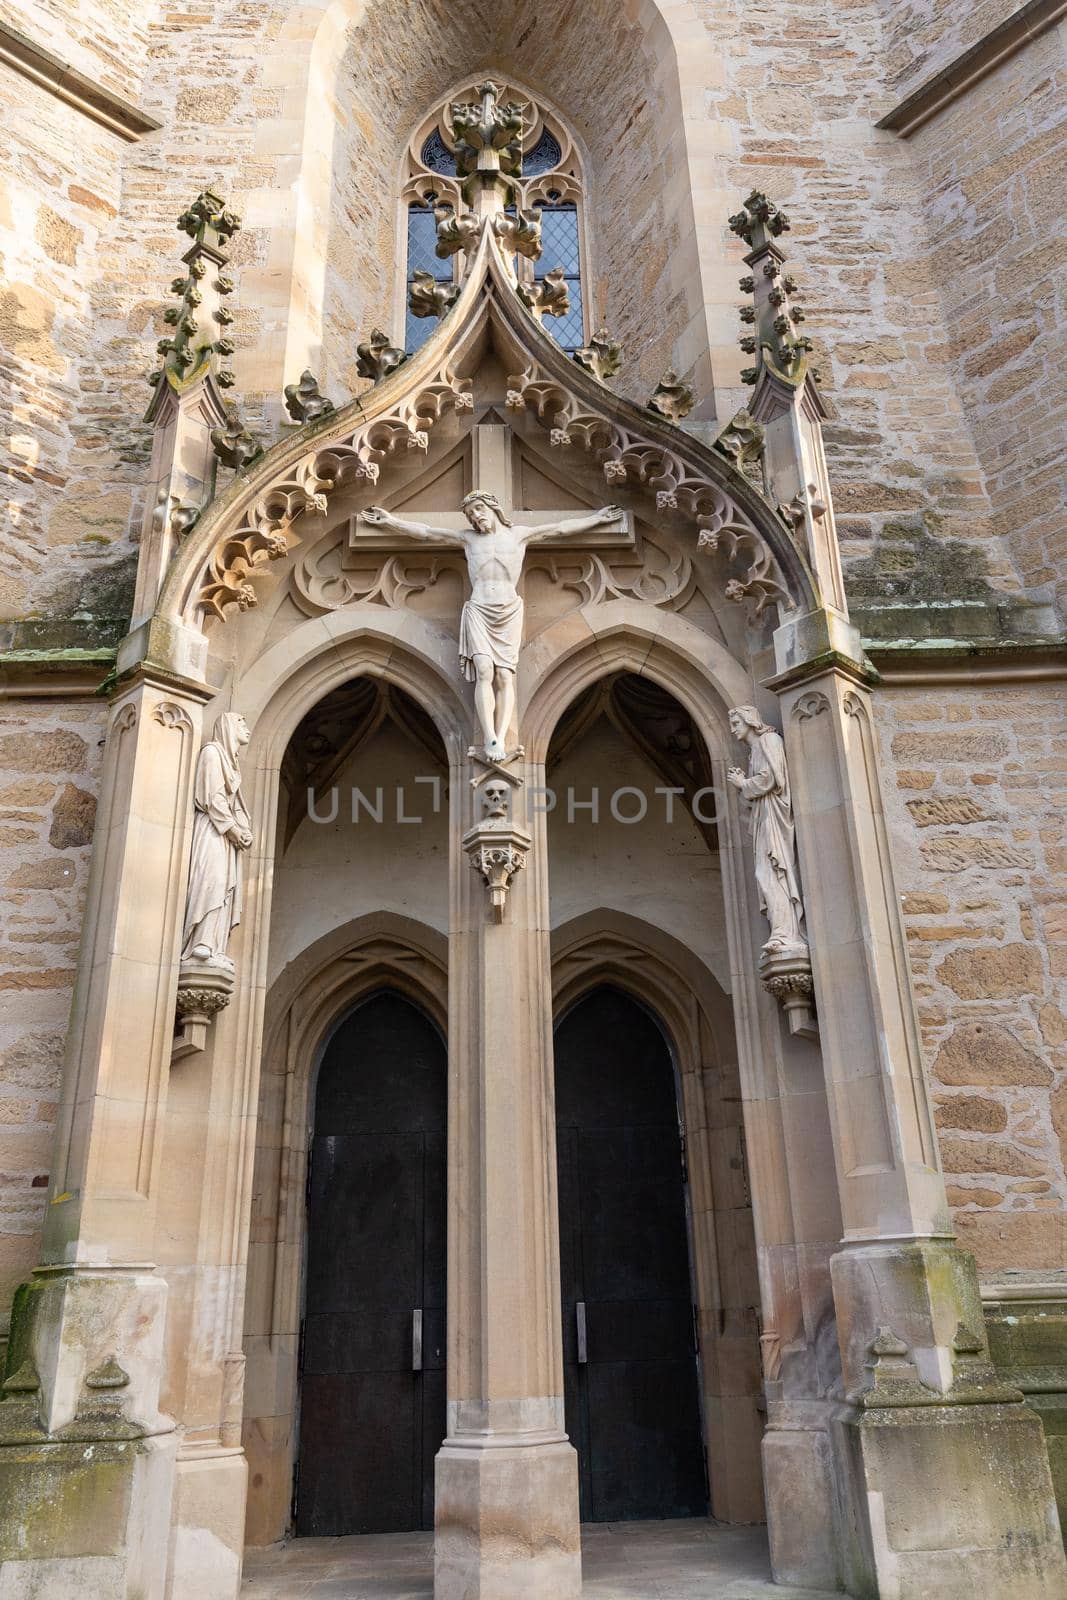 Entrance of the castle church in Meisenheim, Germany